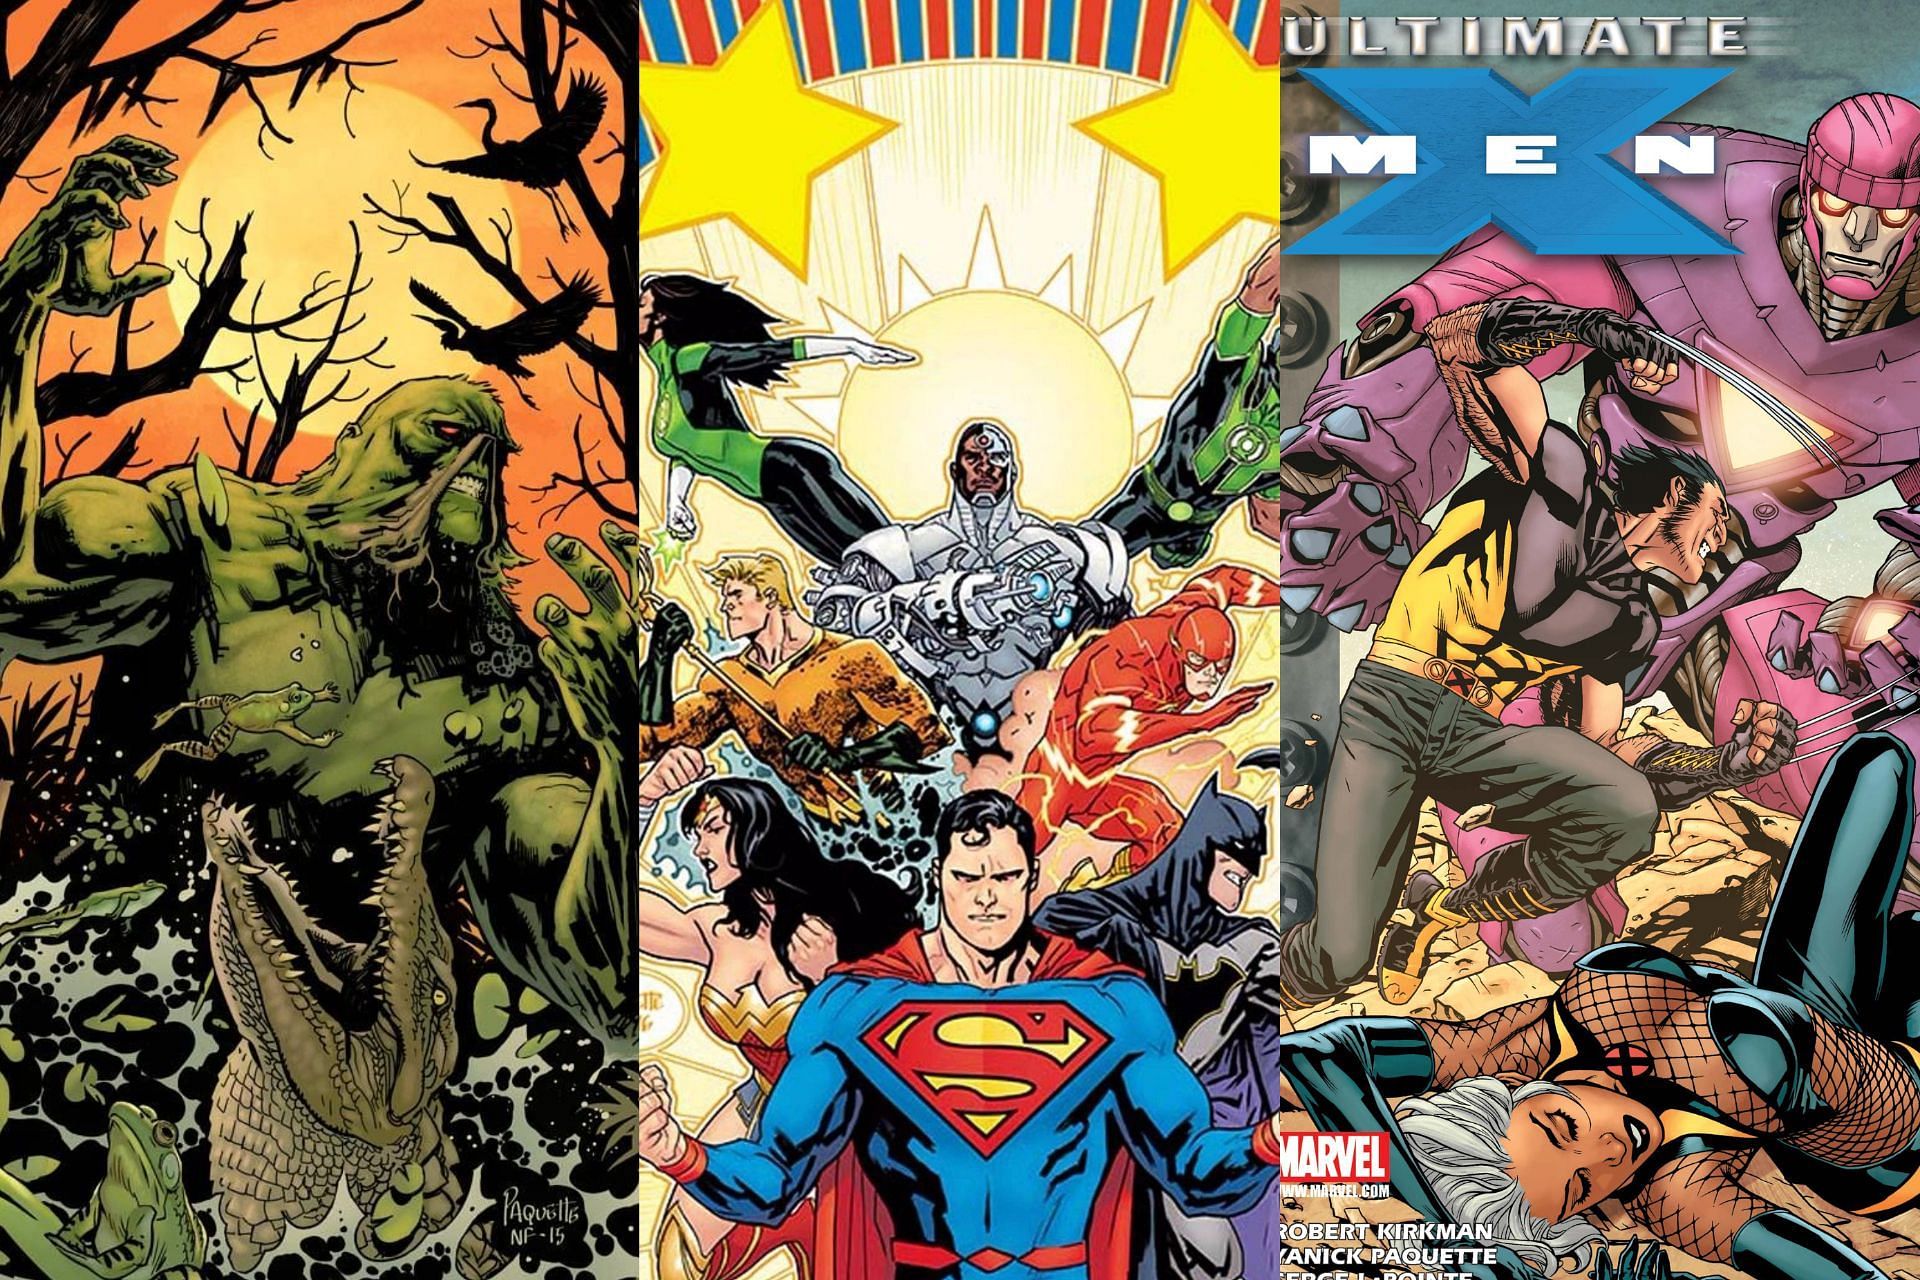 Swamp Thing, JLA and X-Men illustrated by Yanick Paquette (Images via DC and Marvel)